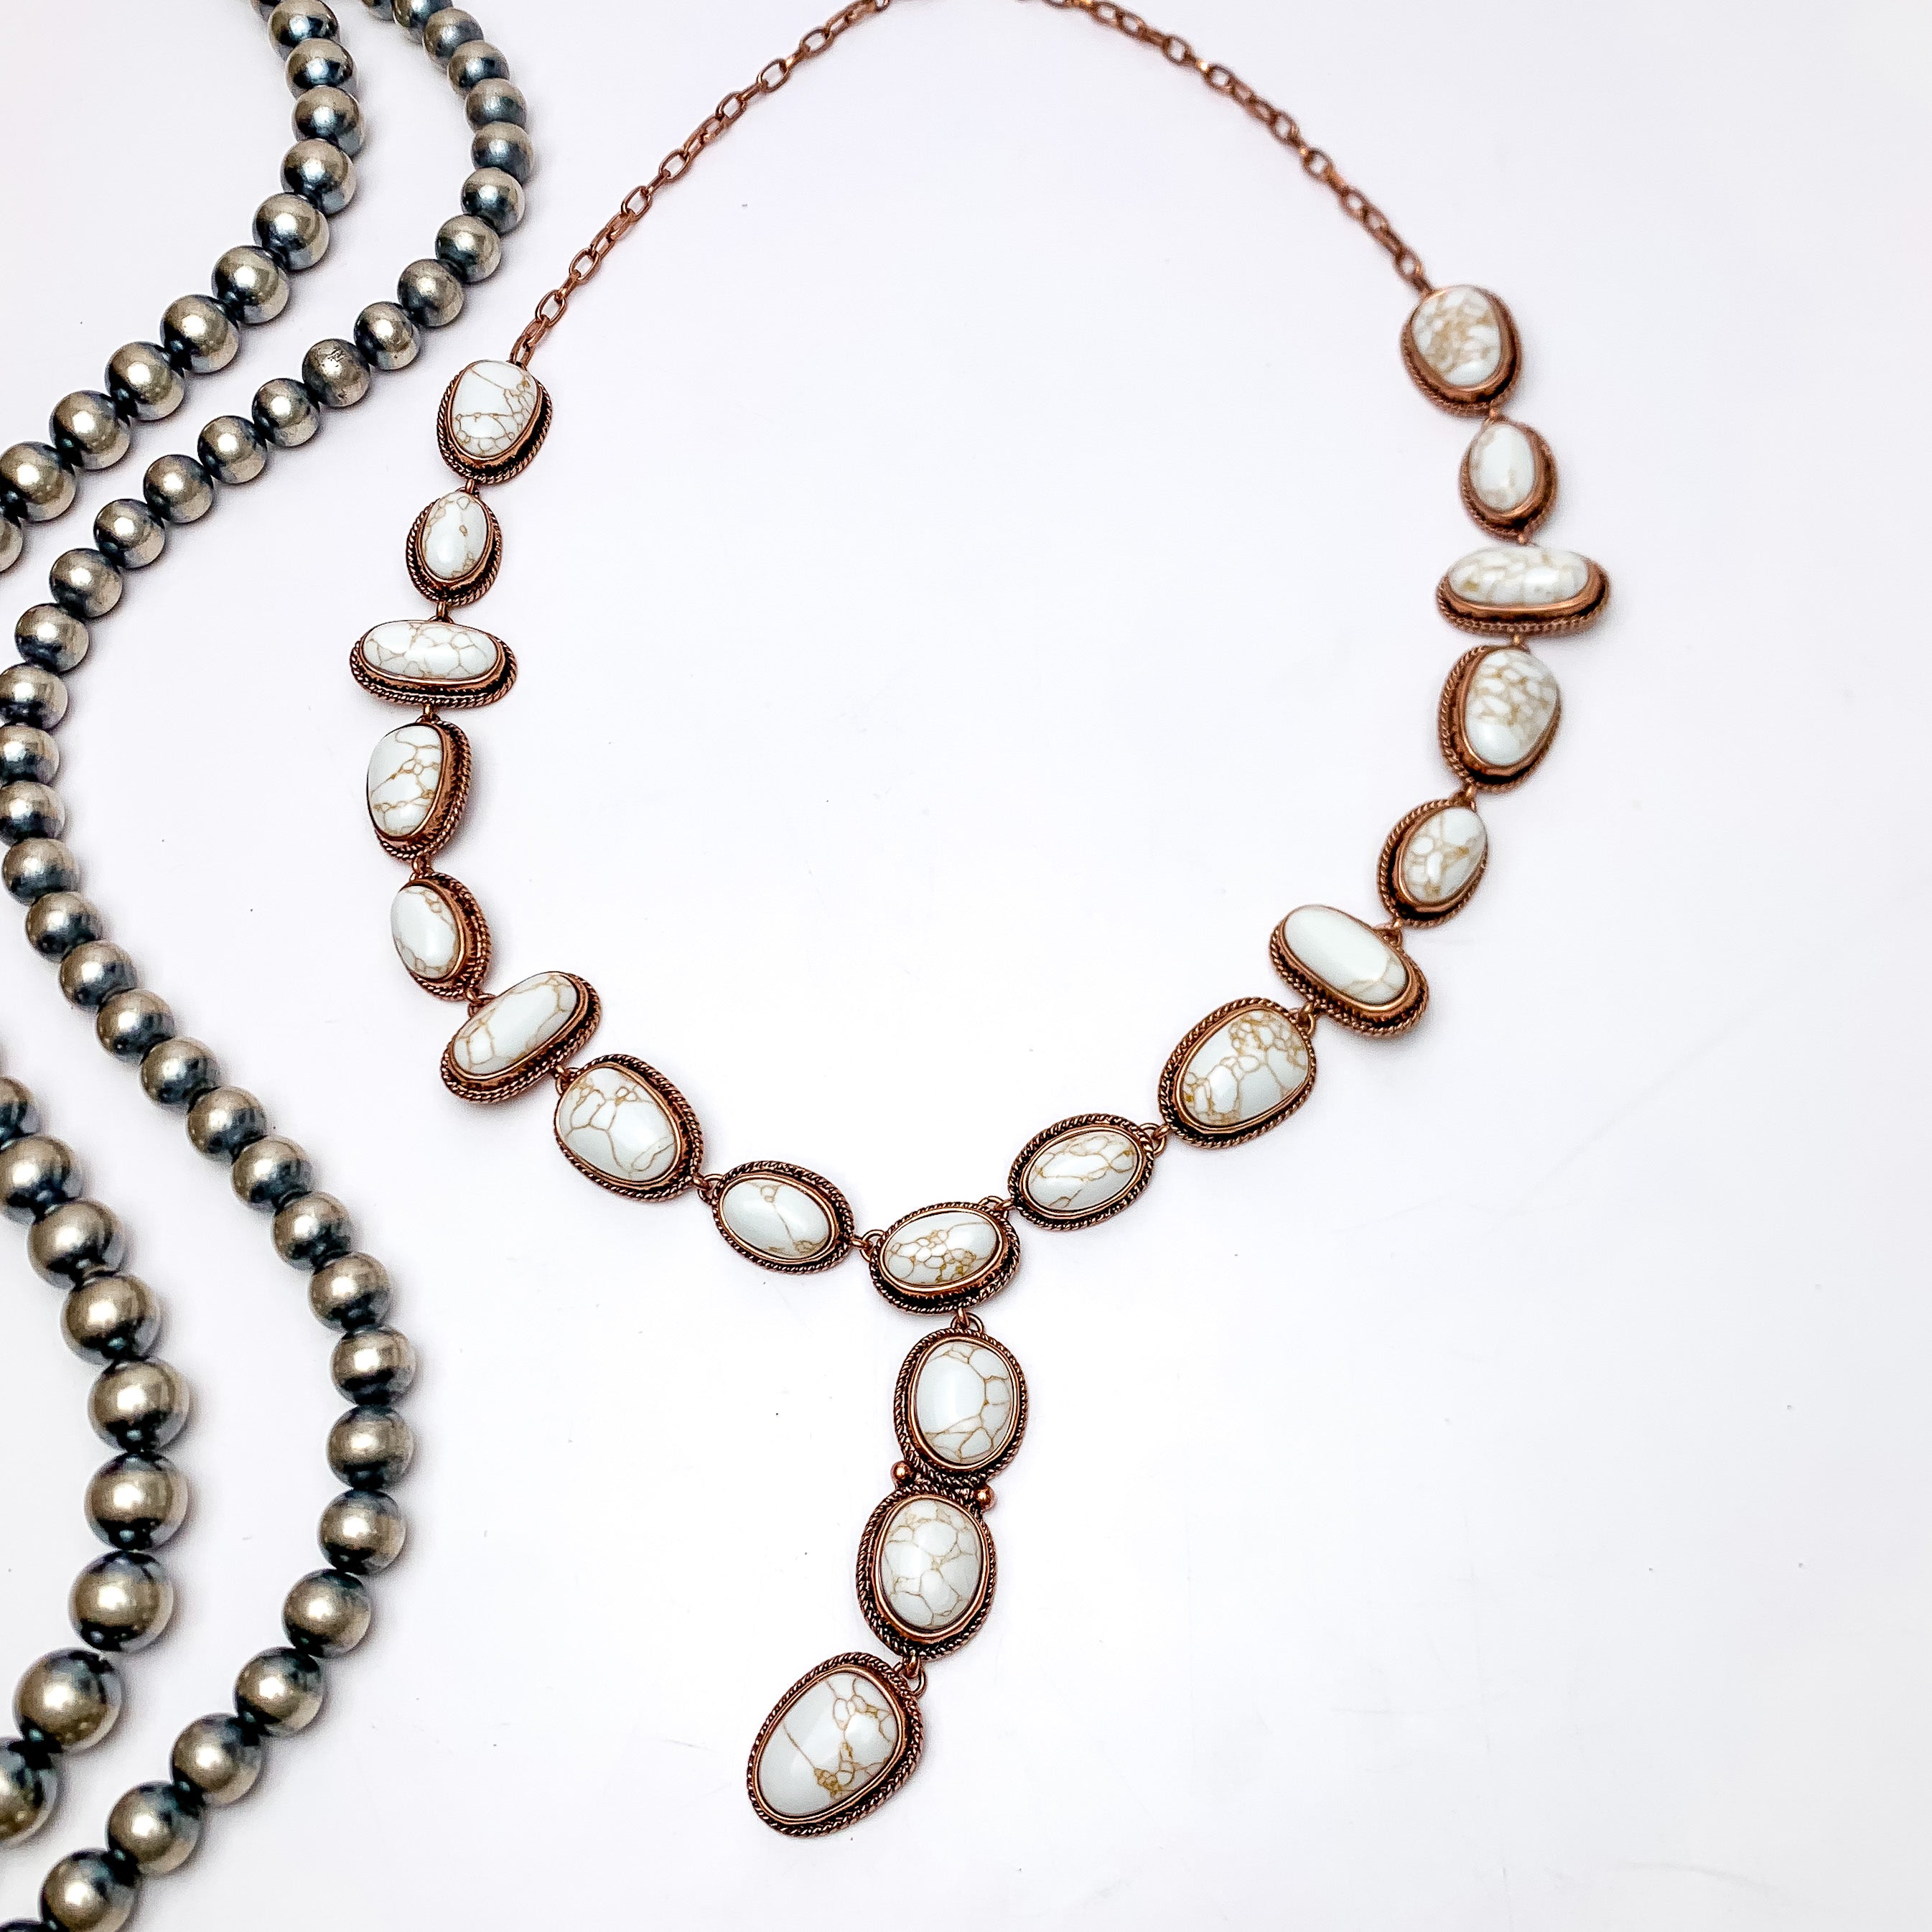 Western Stone Lariat Necklace With Ivory Stones. This copper and ivory necklace is laying on a white background with Navajo pearls to the left of it for decoration.